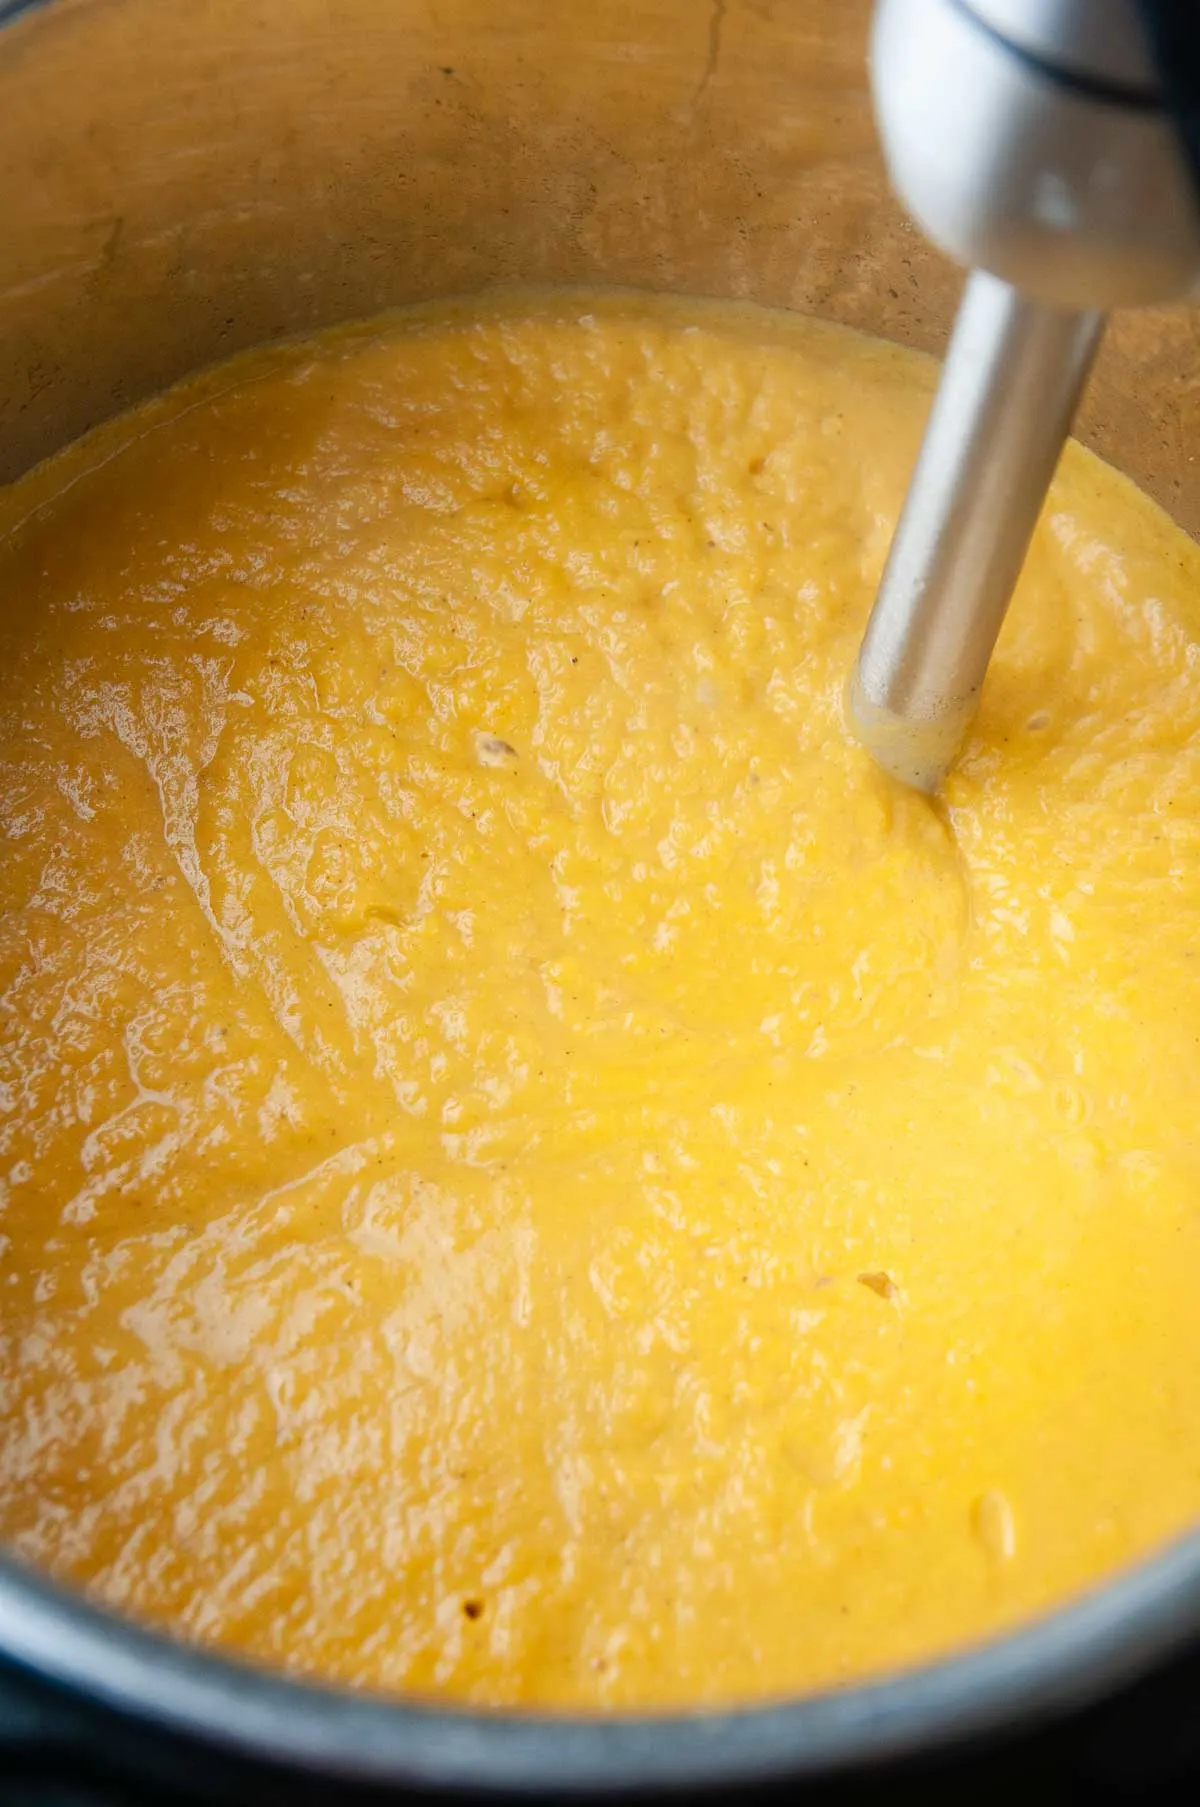 Puree the sweet potato and pumpkin soup with an immersion blender